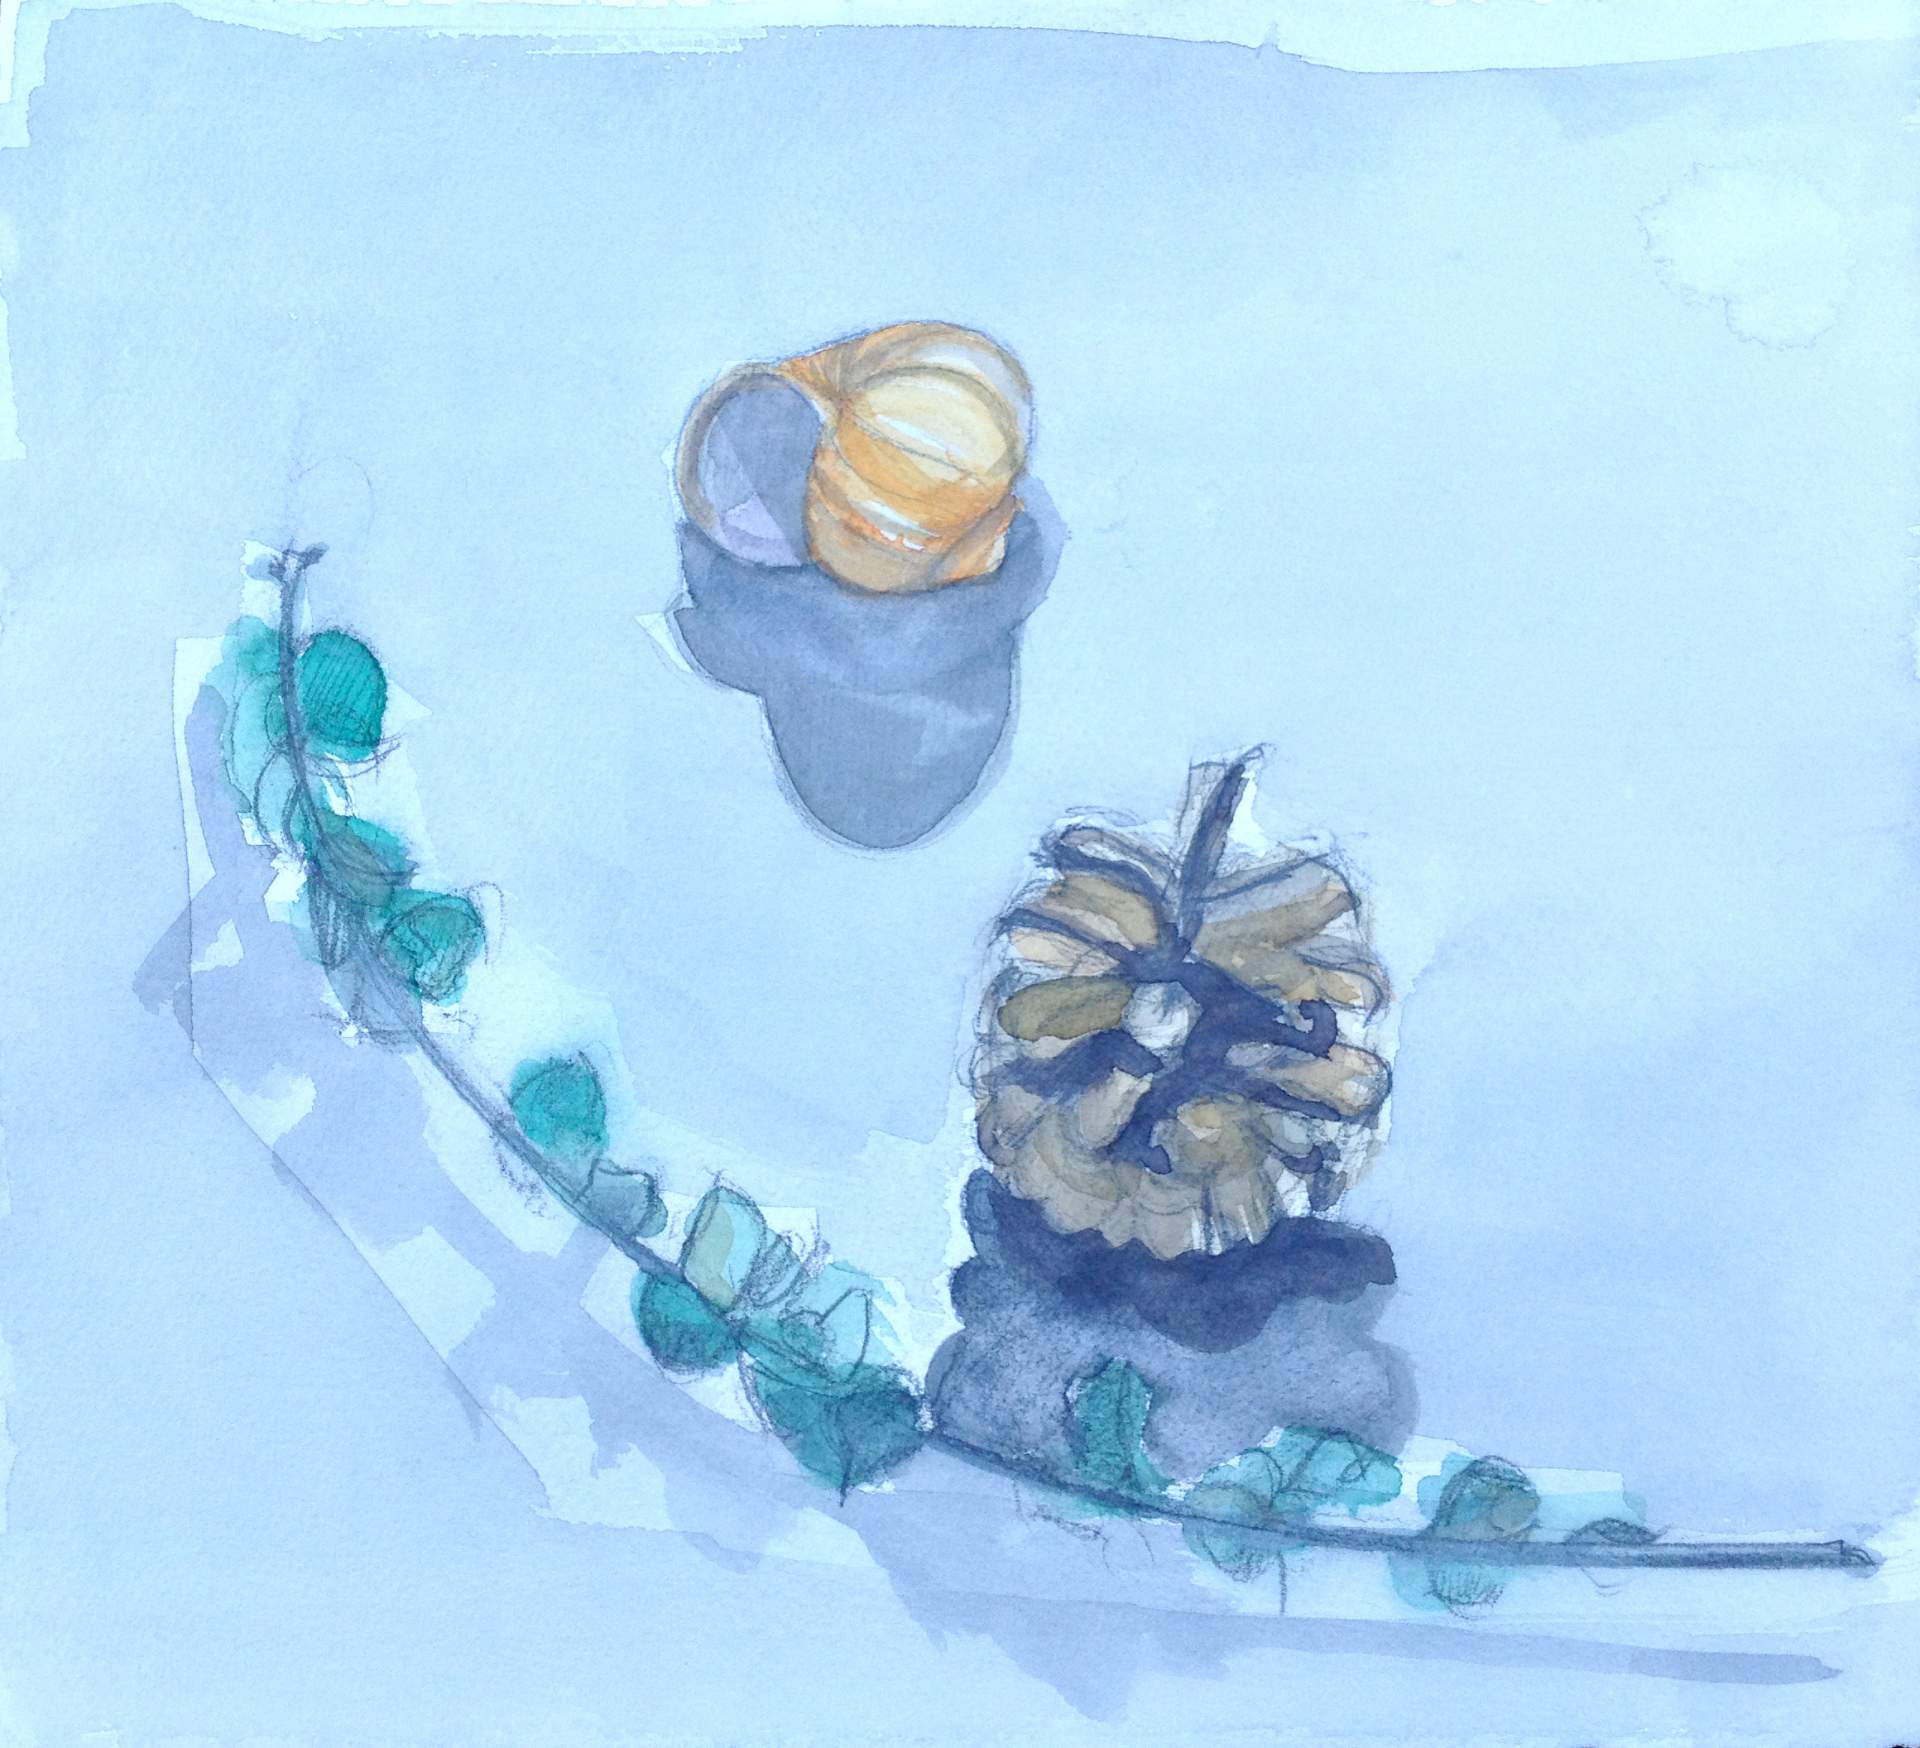 "On Watercolor Workshopping" by Amy Greenan